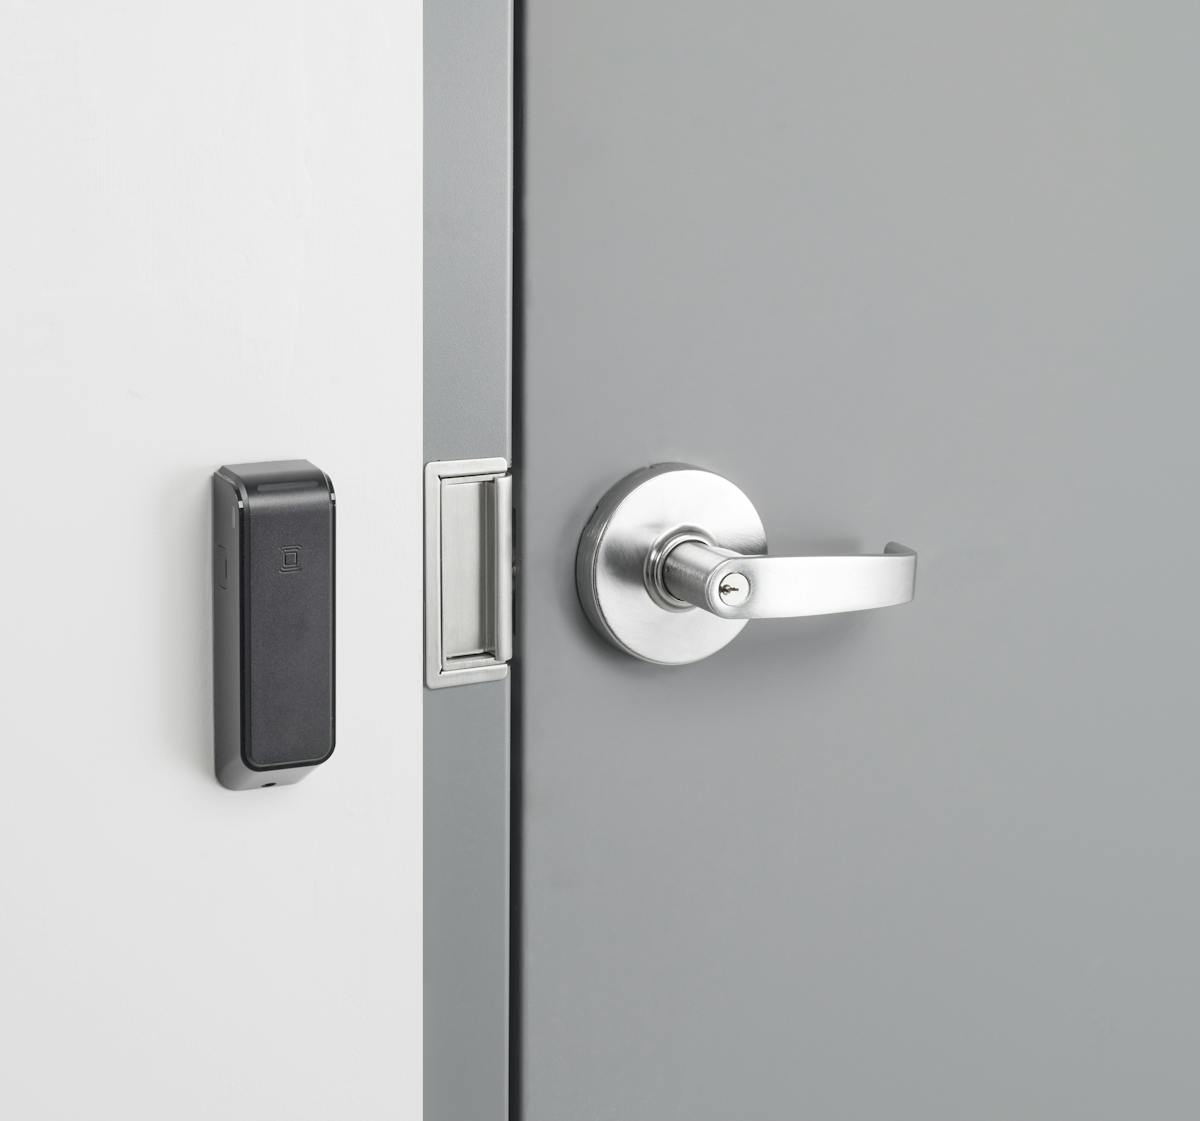 Assess the health of the door and frame when installing an electric strike.